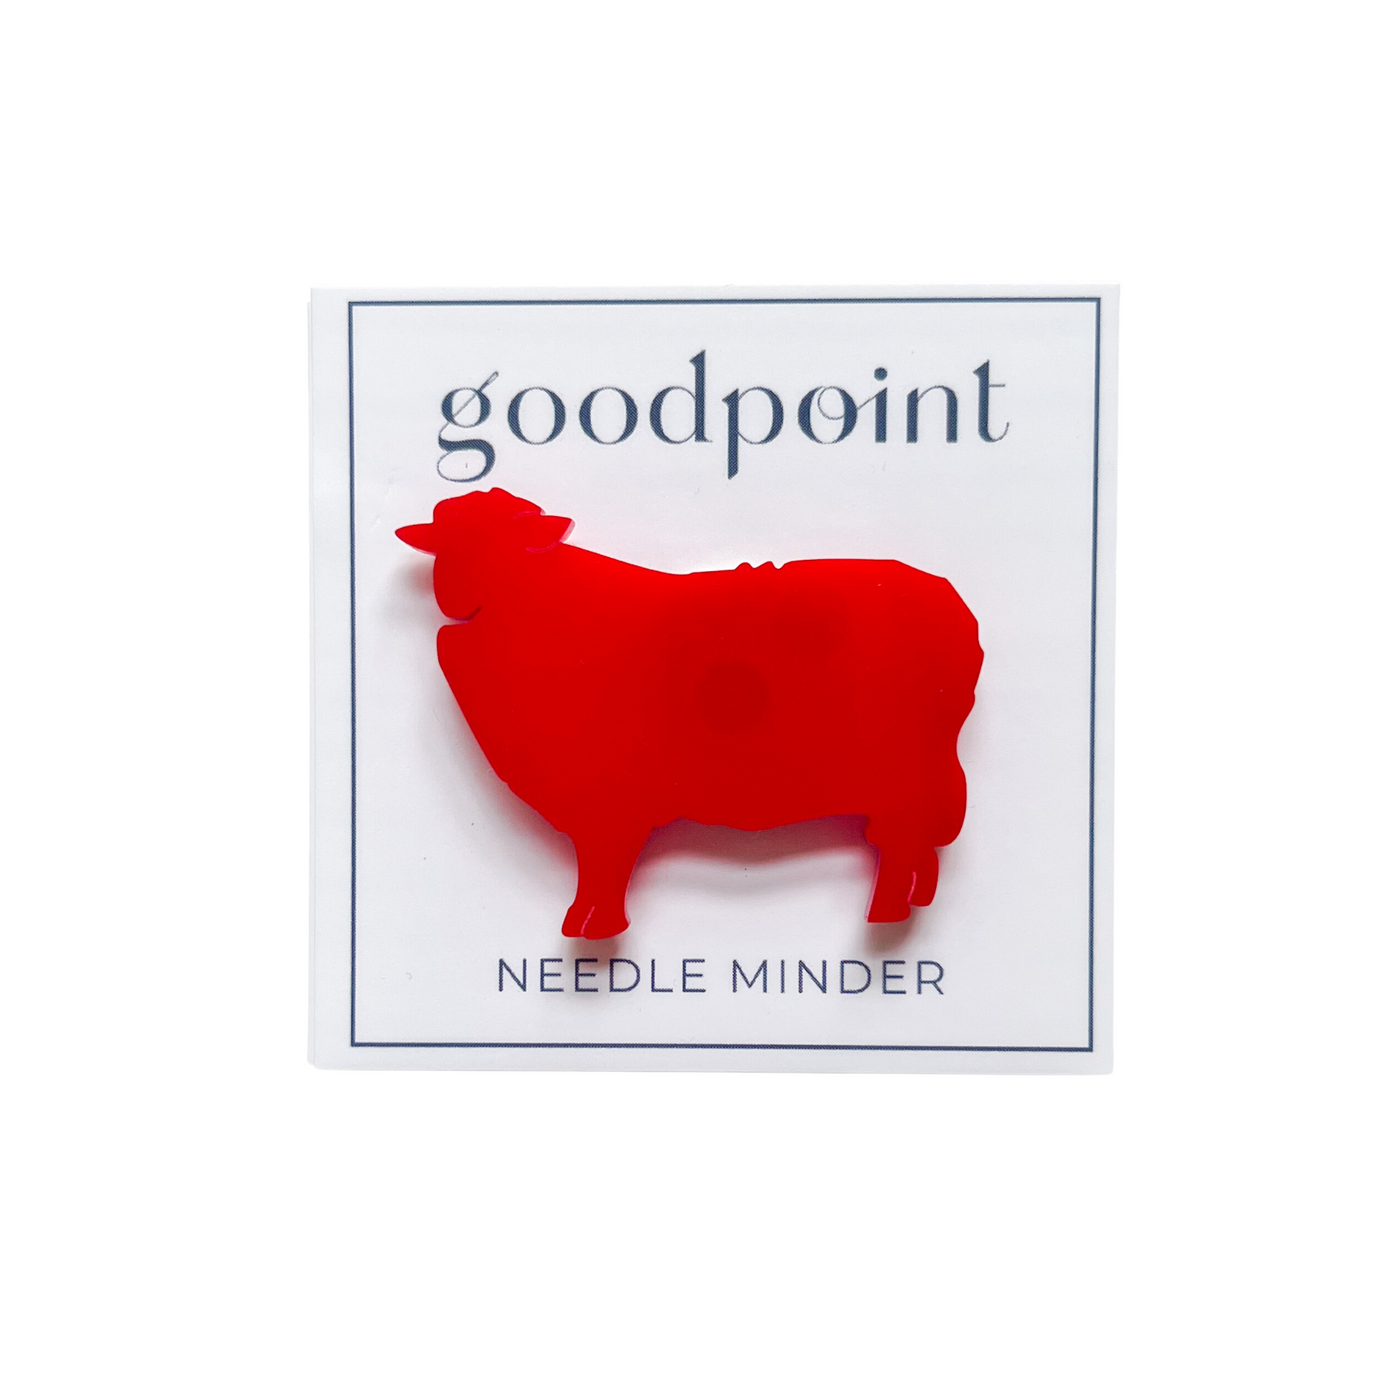 White card holds a red acrylic sheep magnet. The goodpoint logo and the words "Needle Minder" are at the bottom of the card.